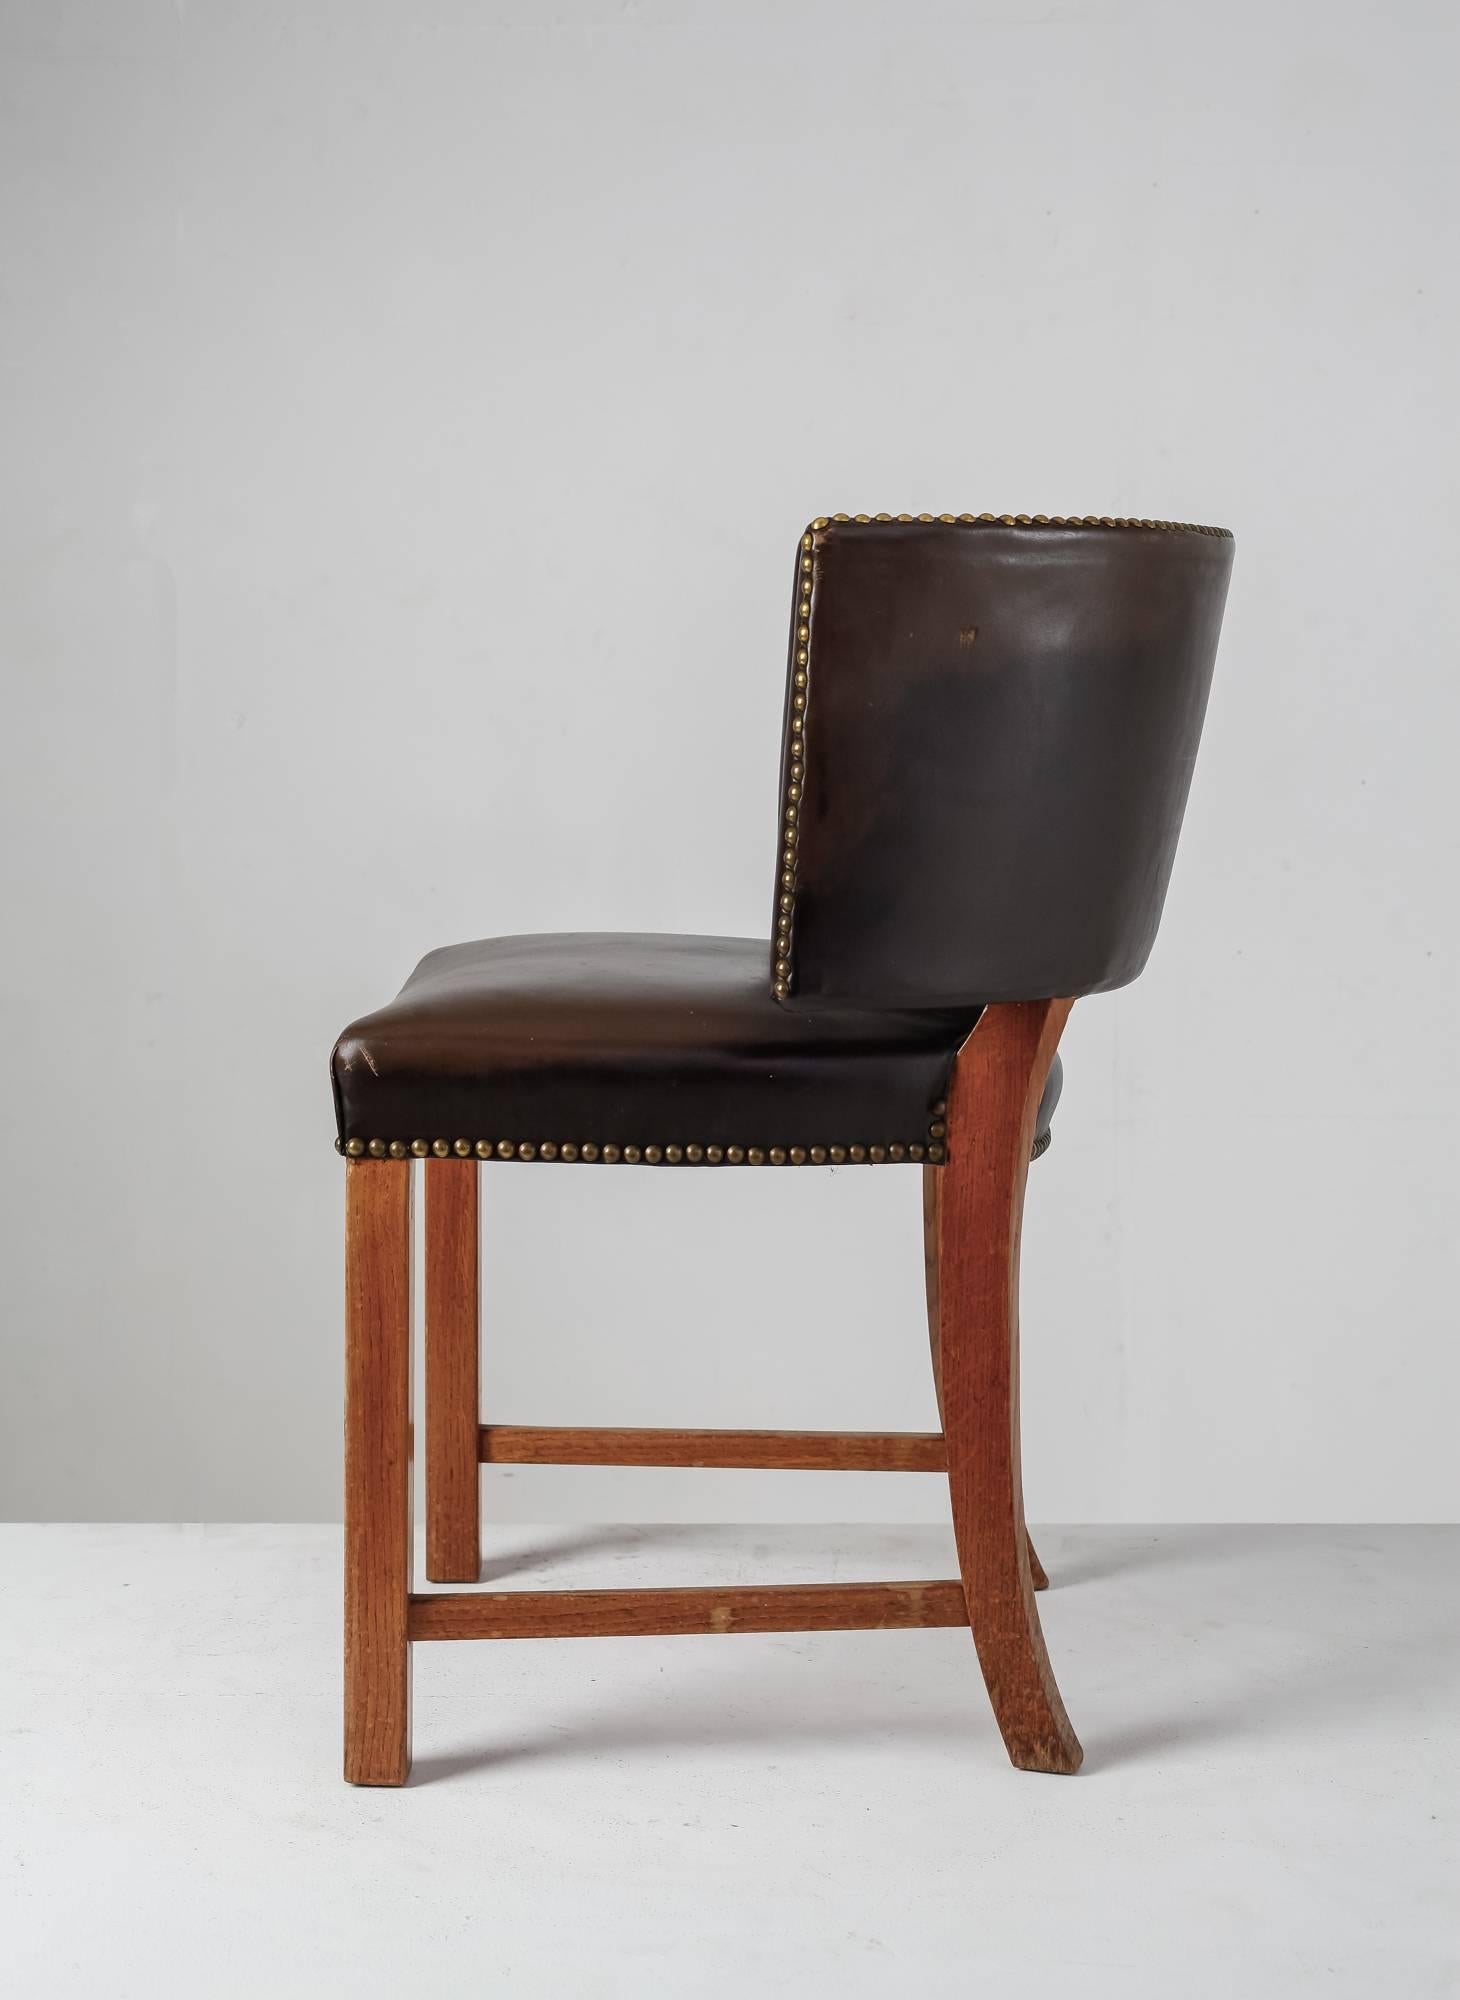 Mid-20th Century Danish Oak and Leather Sidechair with Large, Curved Backrest, 1930s For Sale